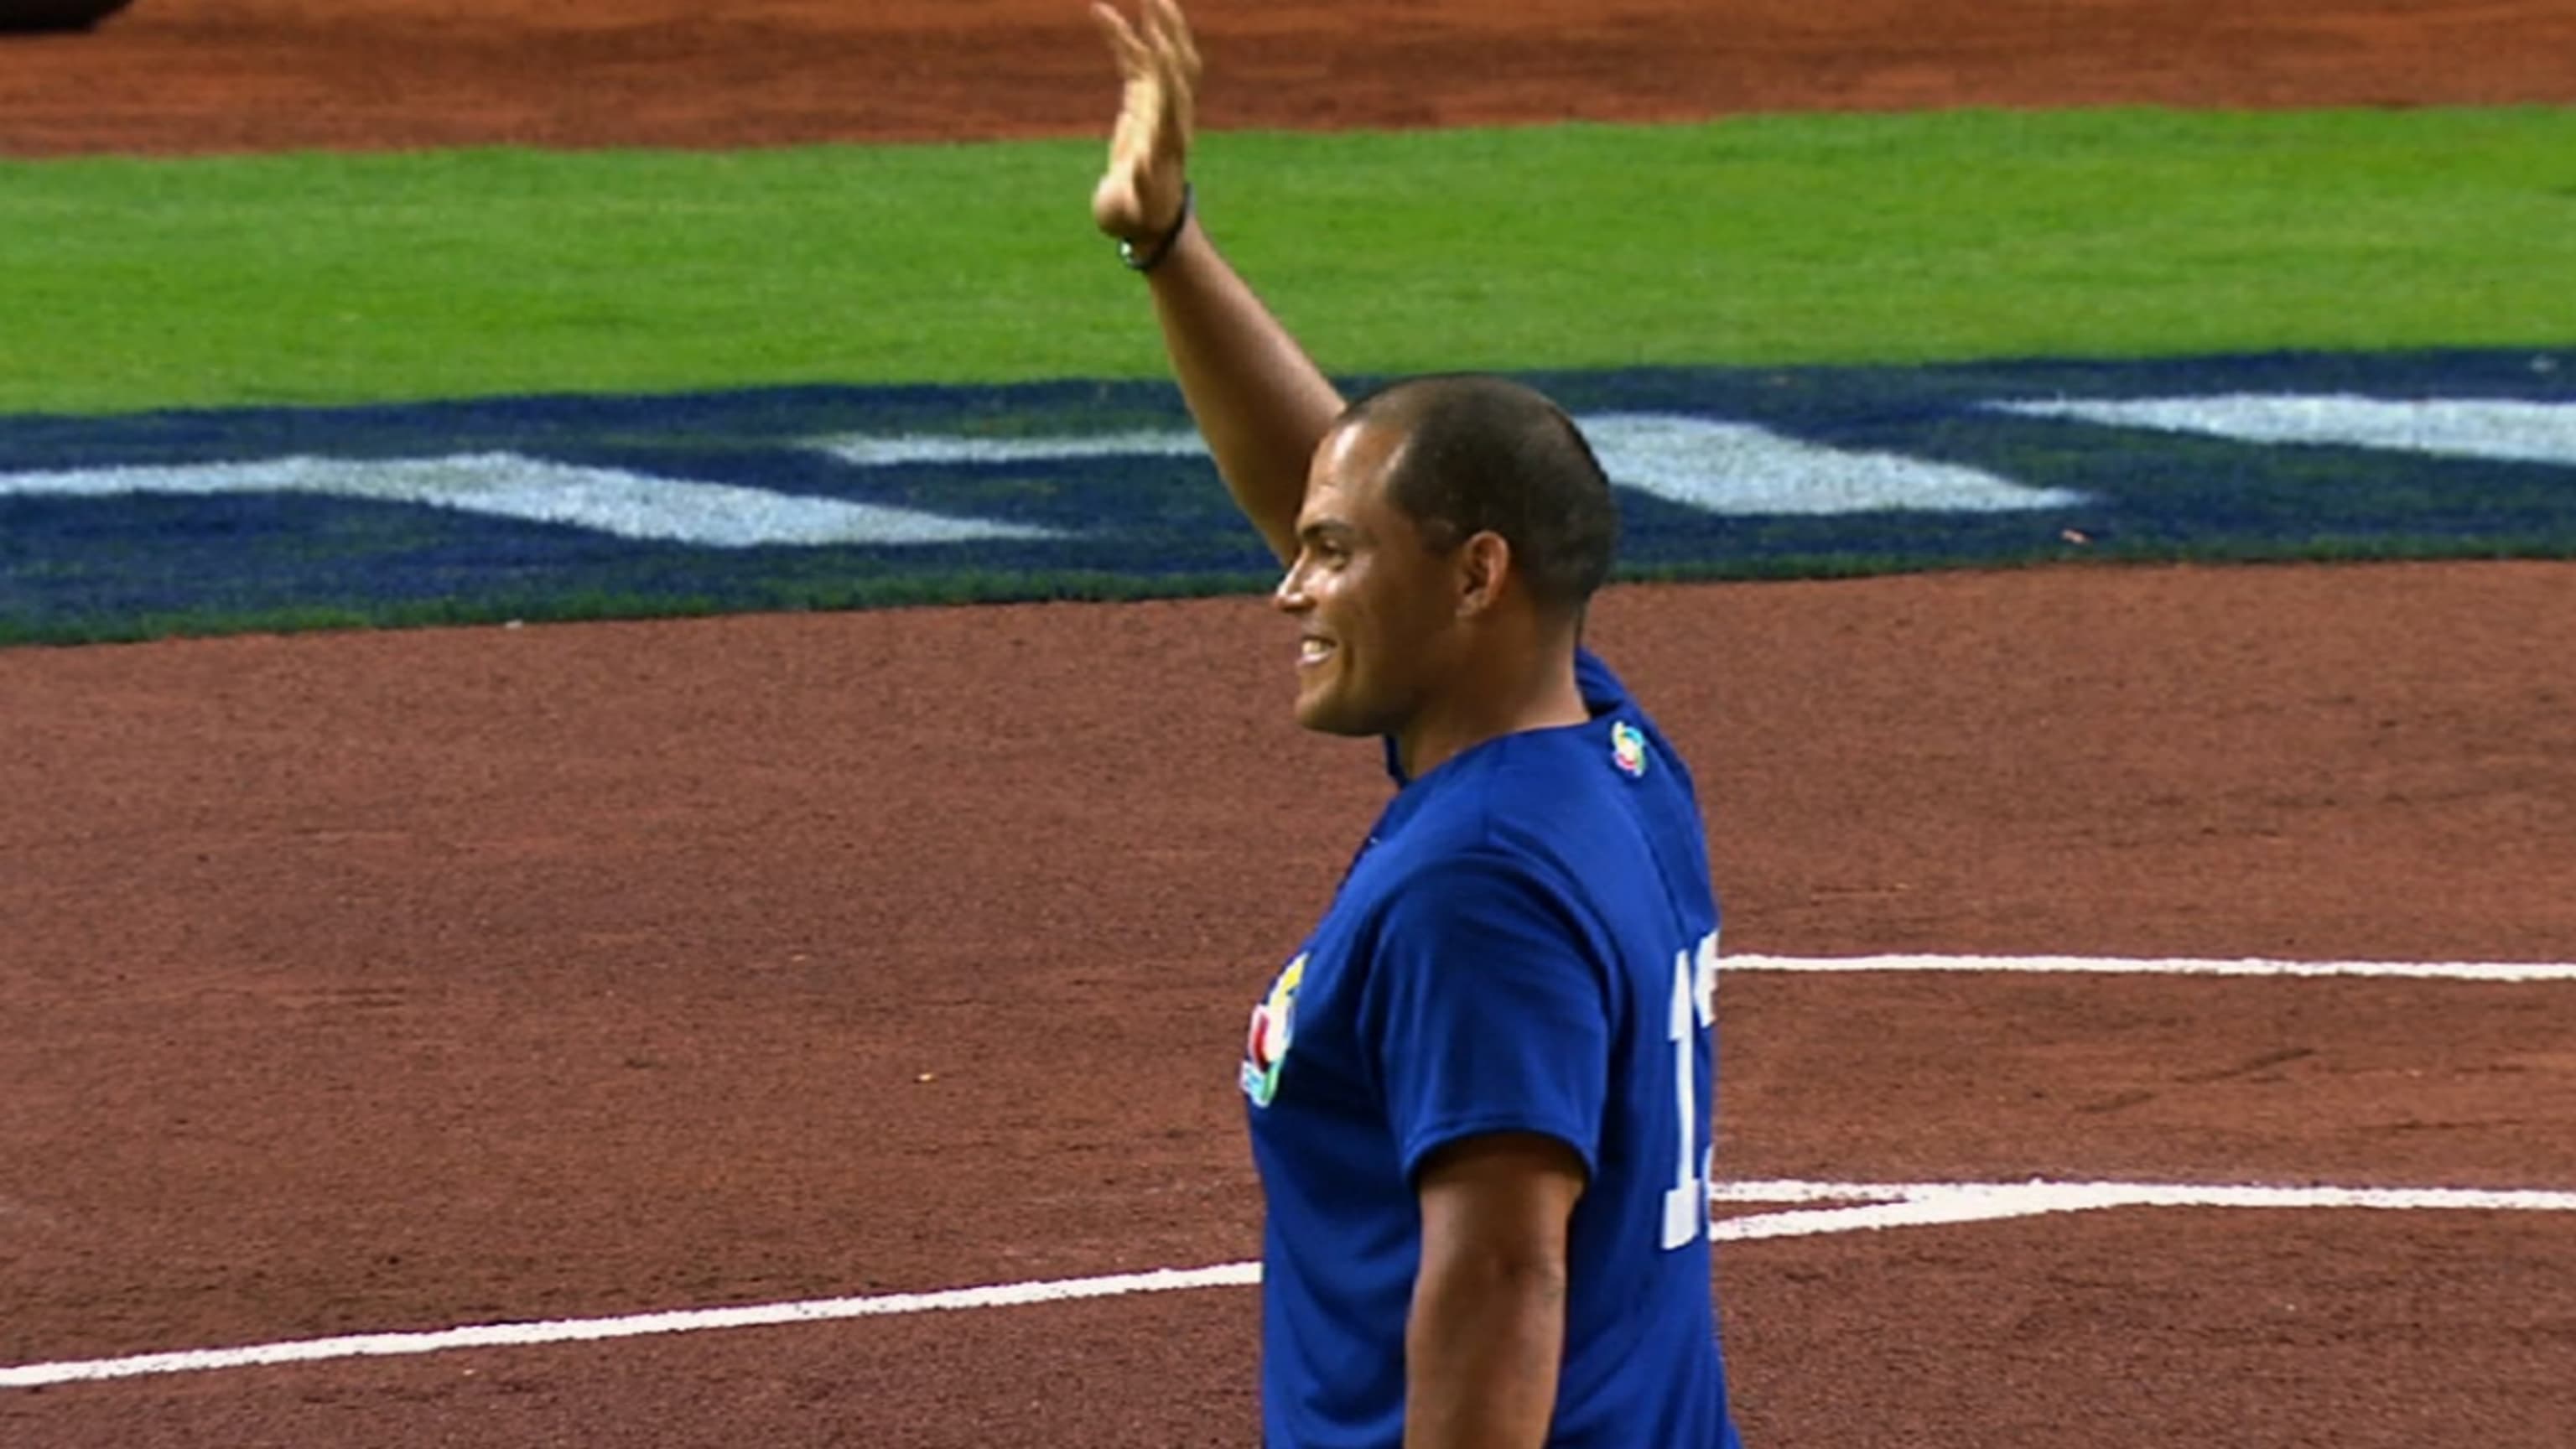 Pudge throws out the first pitch